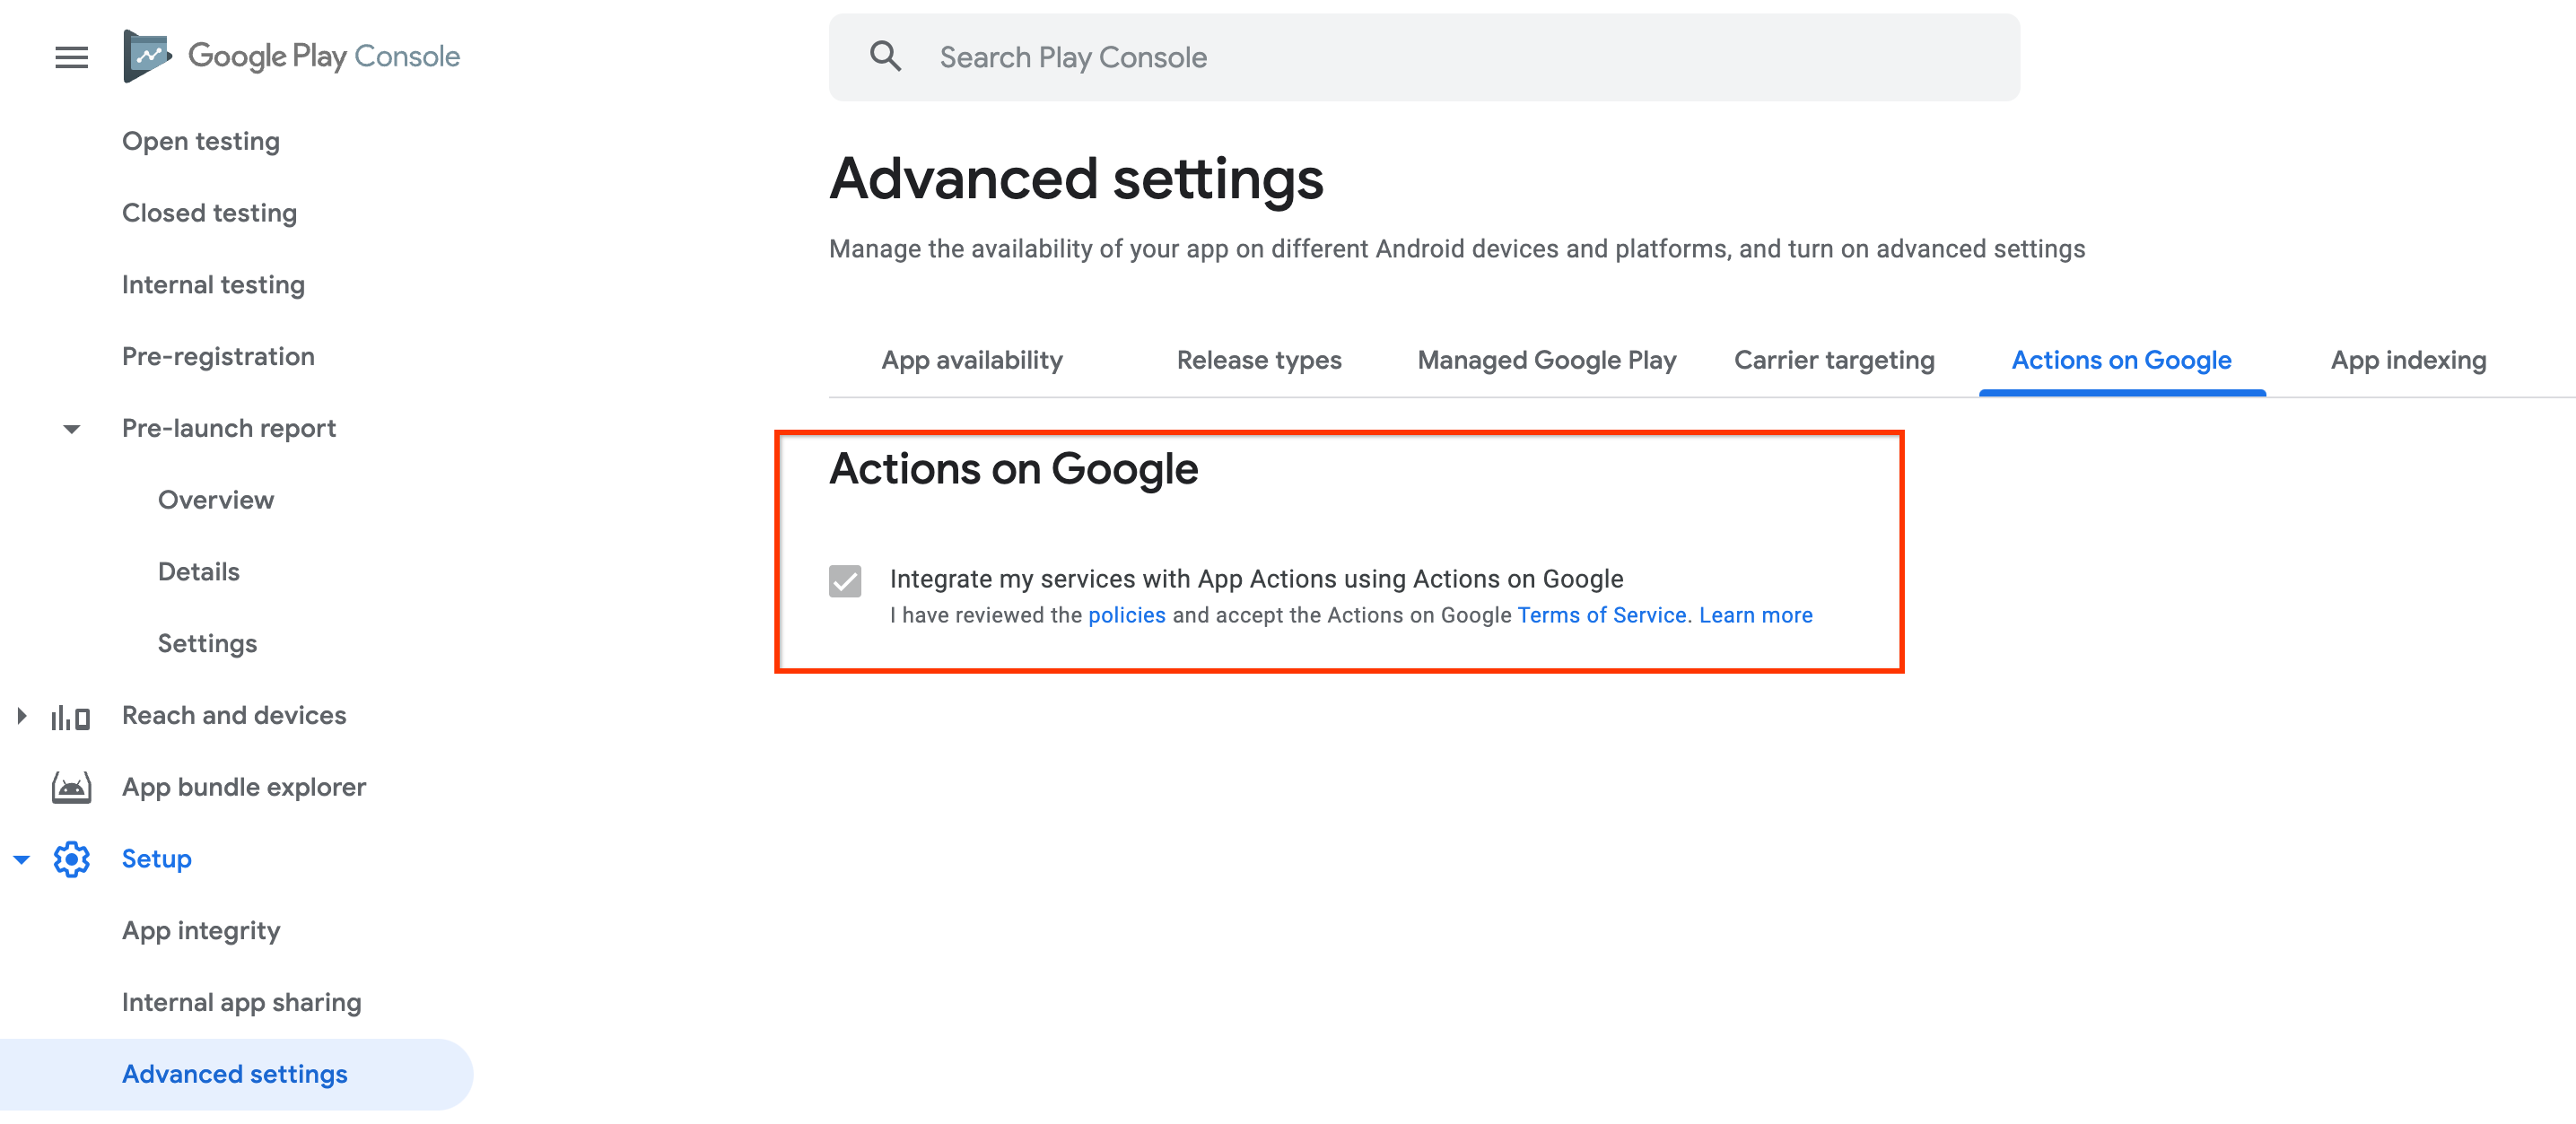 Google Play Console 内の Actions on Google 利用規約